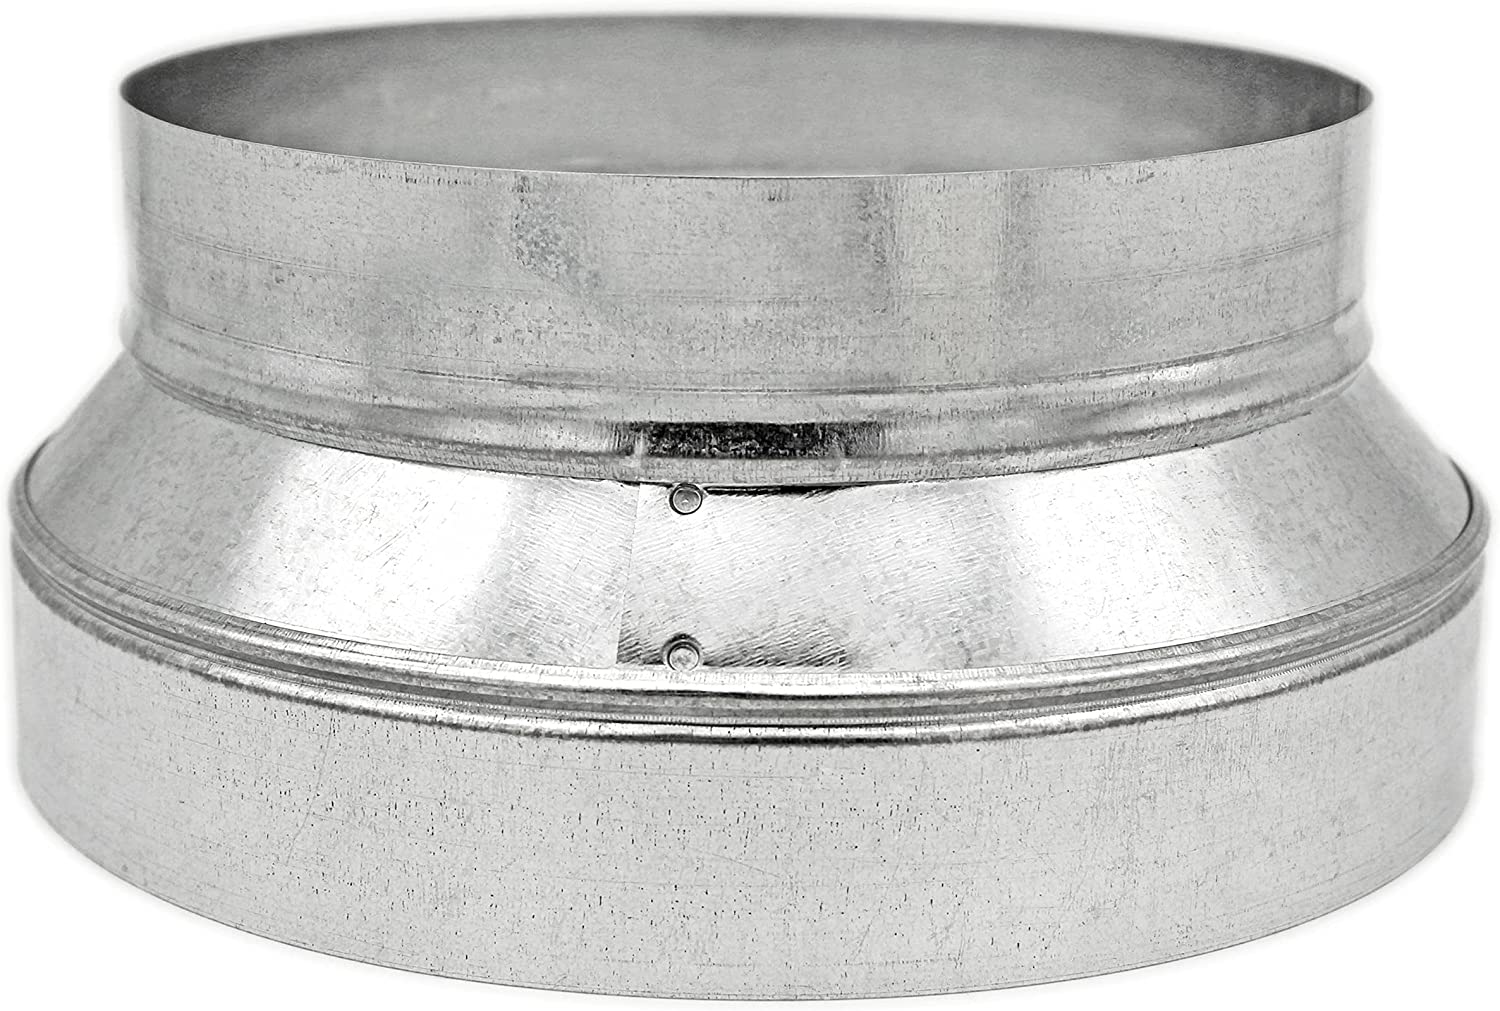 HVAC Premium Round Metal Pipe Reducer & Increaser | 8" to 7" HVAC Duct Reducer or Increaser 30g Gauge | Galvanized Sheet Metal Ducting Connector is Compatible with Duct 7"